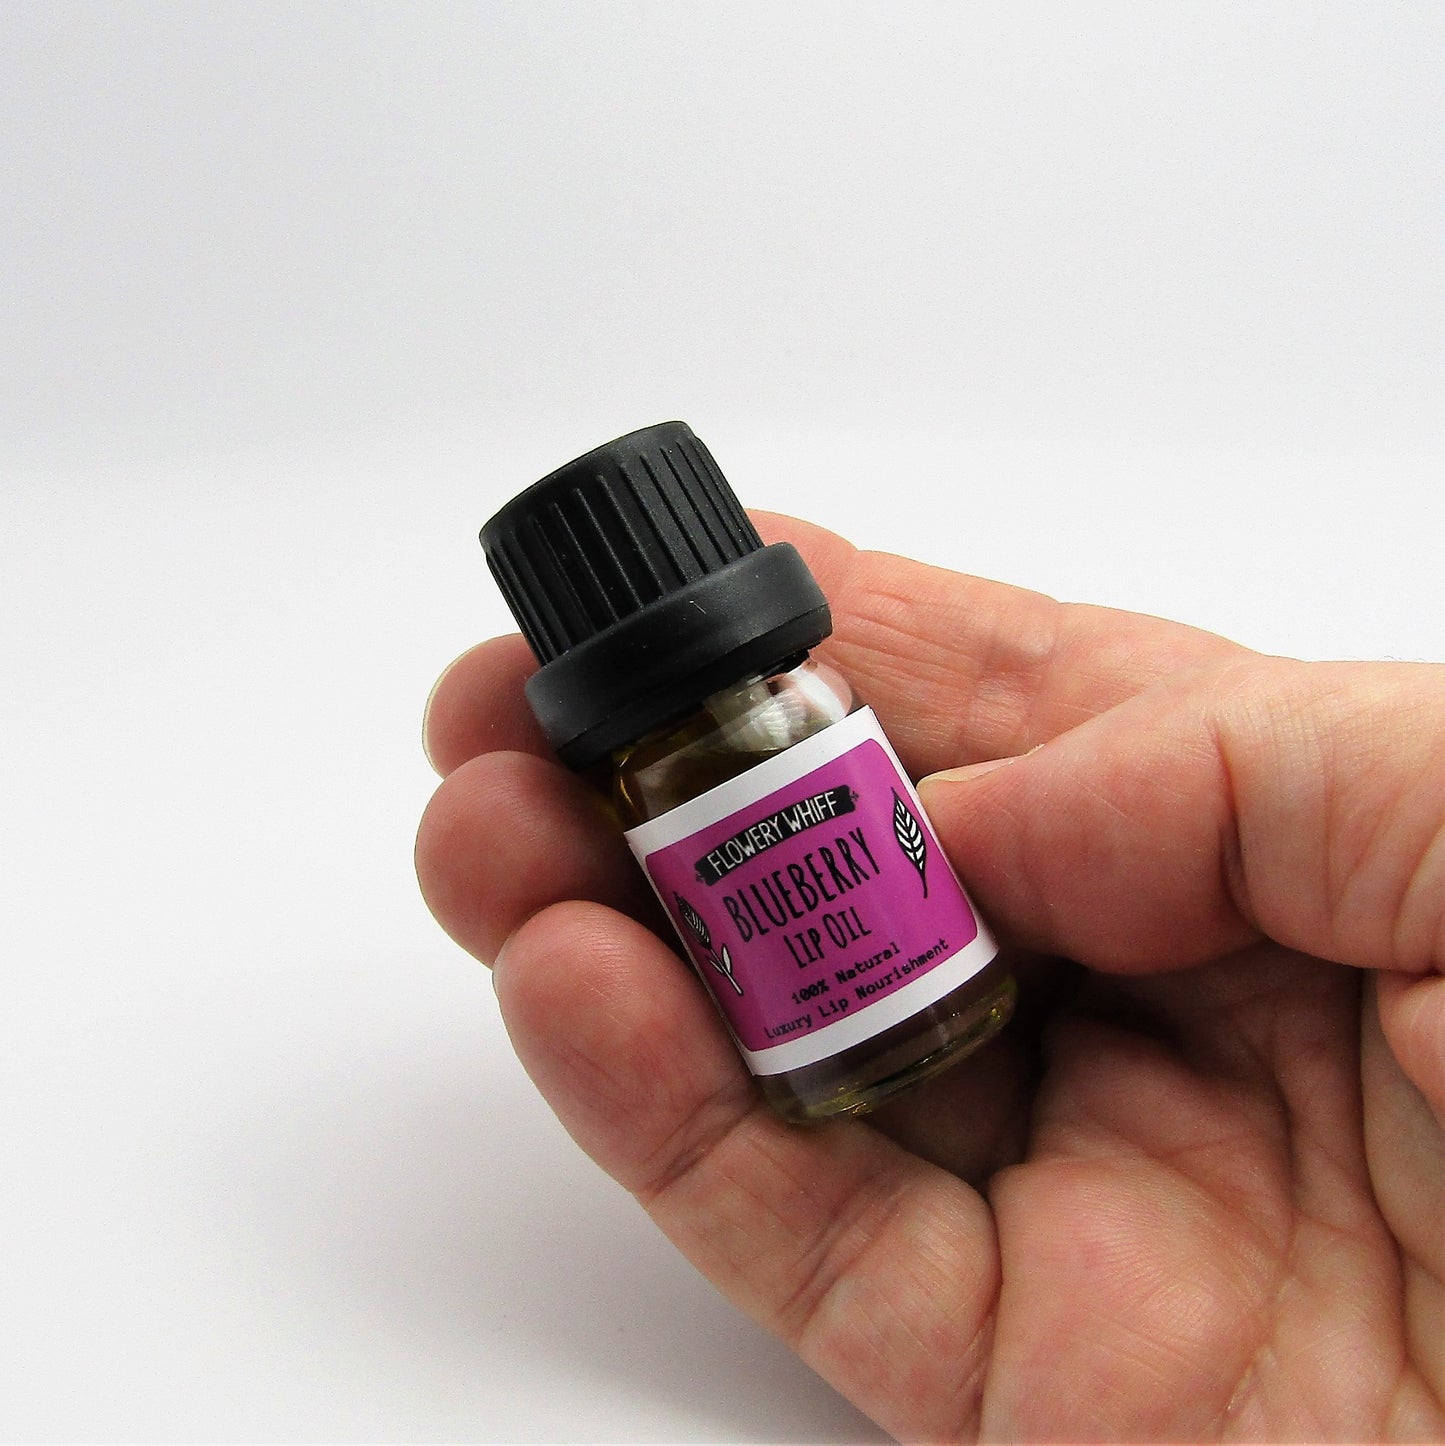 Blueberry Seed Lip Oil